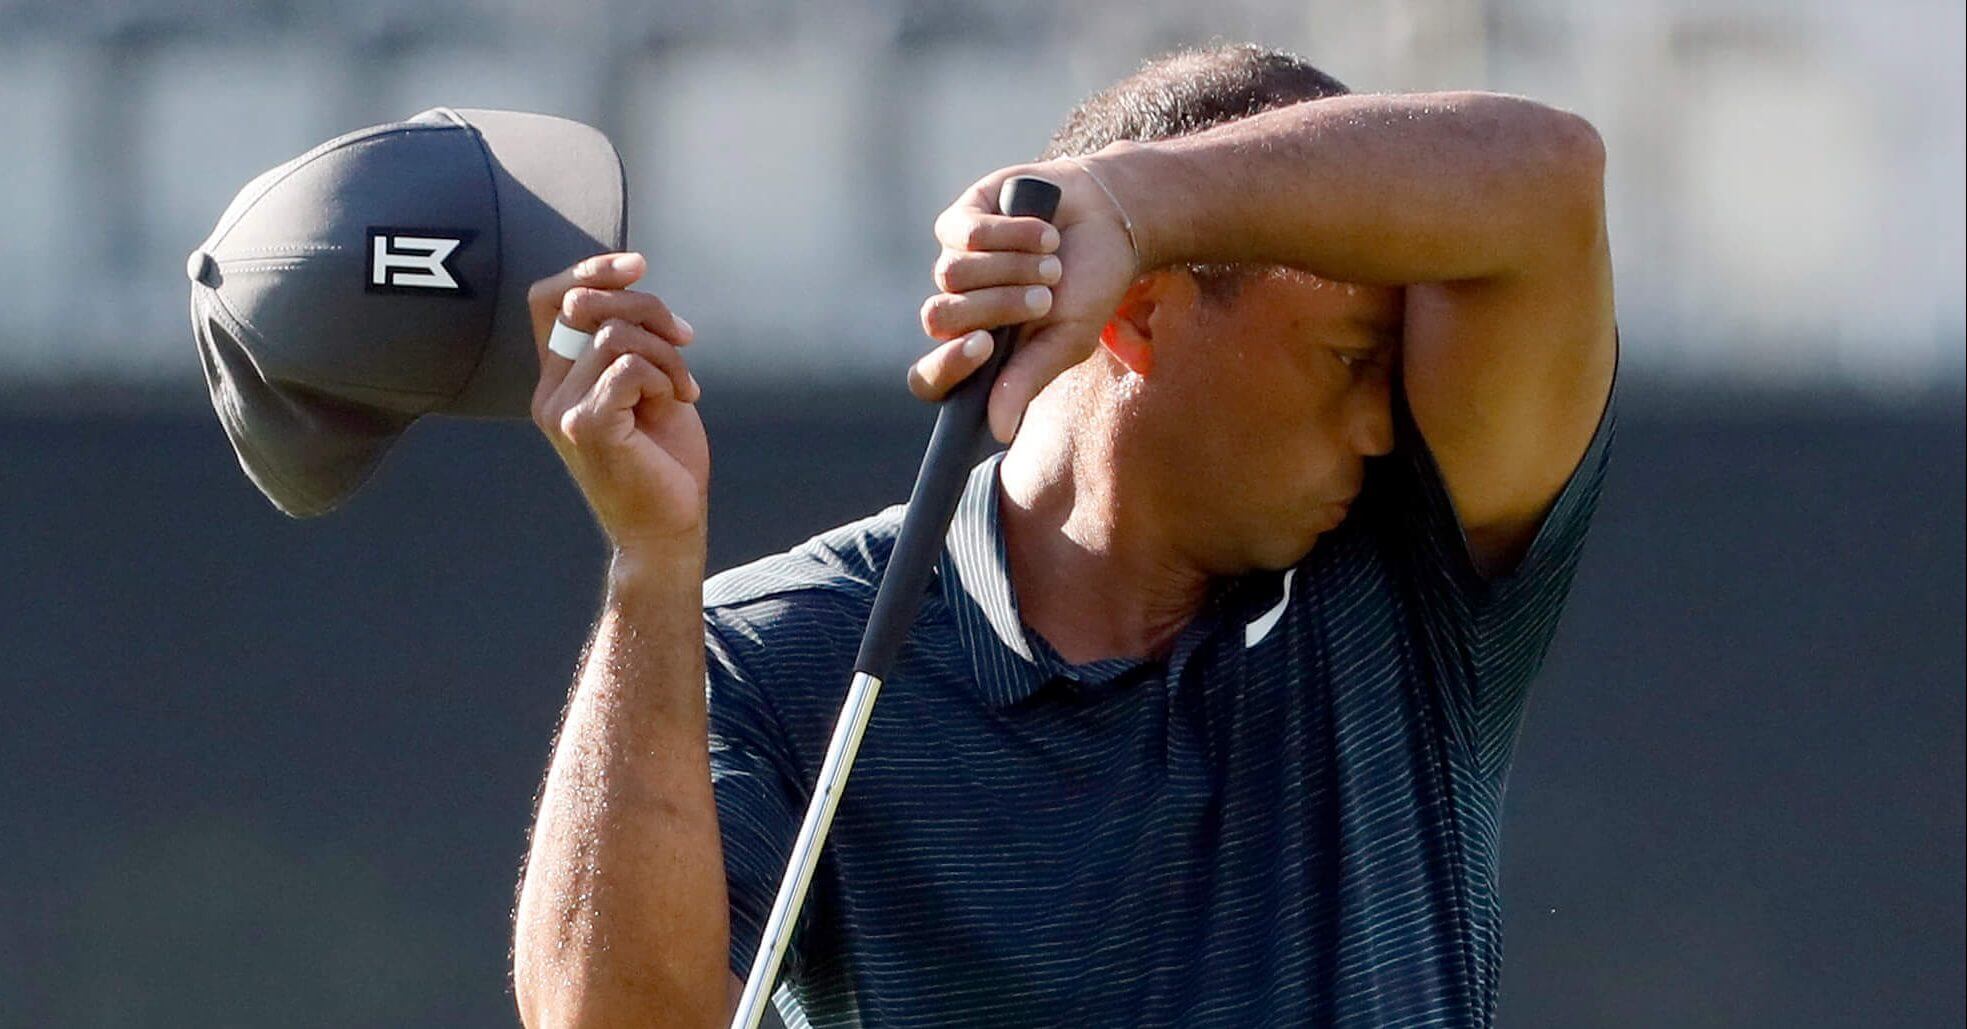 Tiger Woods wipes off his face on the10th green during the first round of the PGA Championship golf tournament at Bellerive Country Club, Thursday, Aug. 9, 2018, in St. Louis.